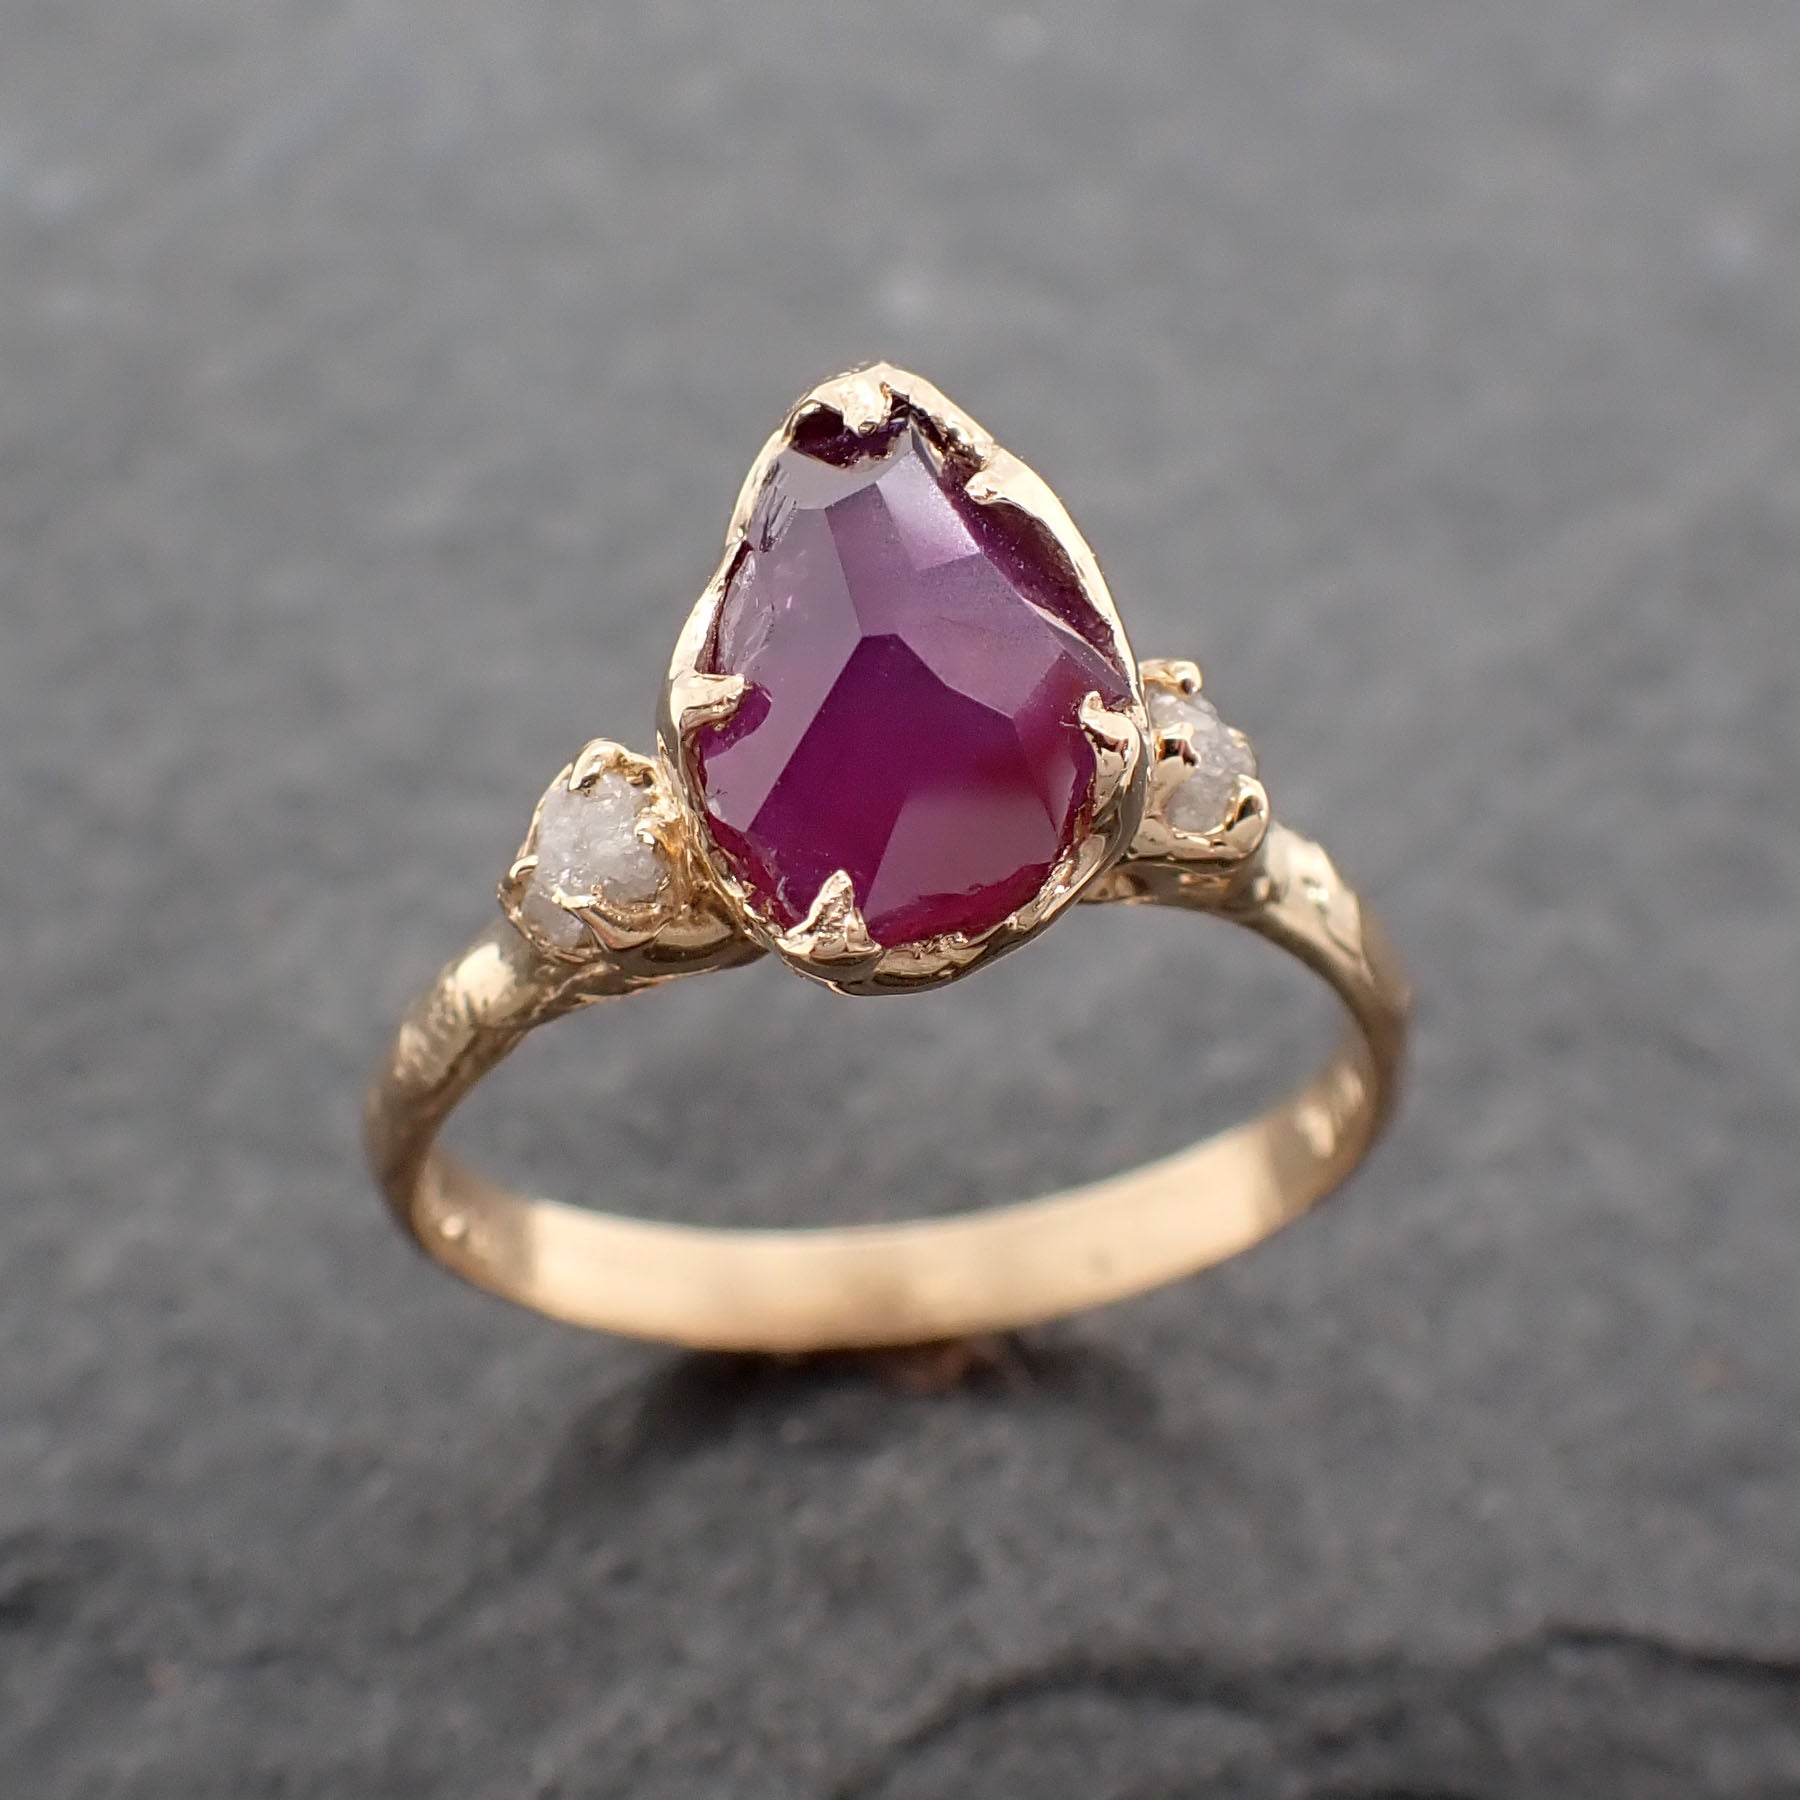 Partially faceted sapphire gemstone Raw Rough Diamond 18k Yellow Gold Engagement ring multi stone 2437